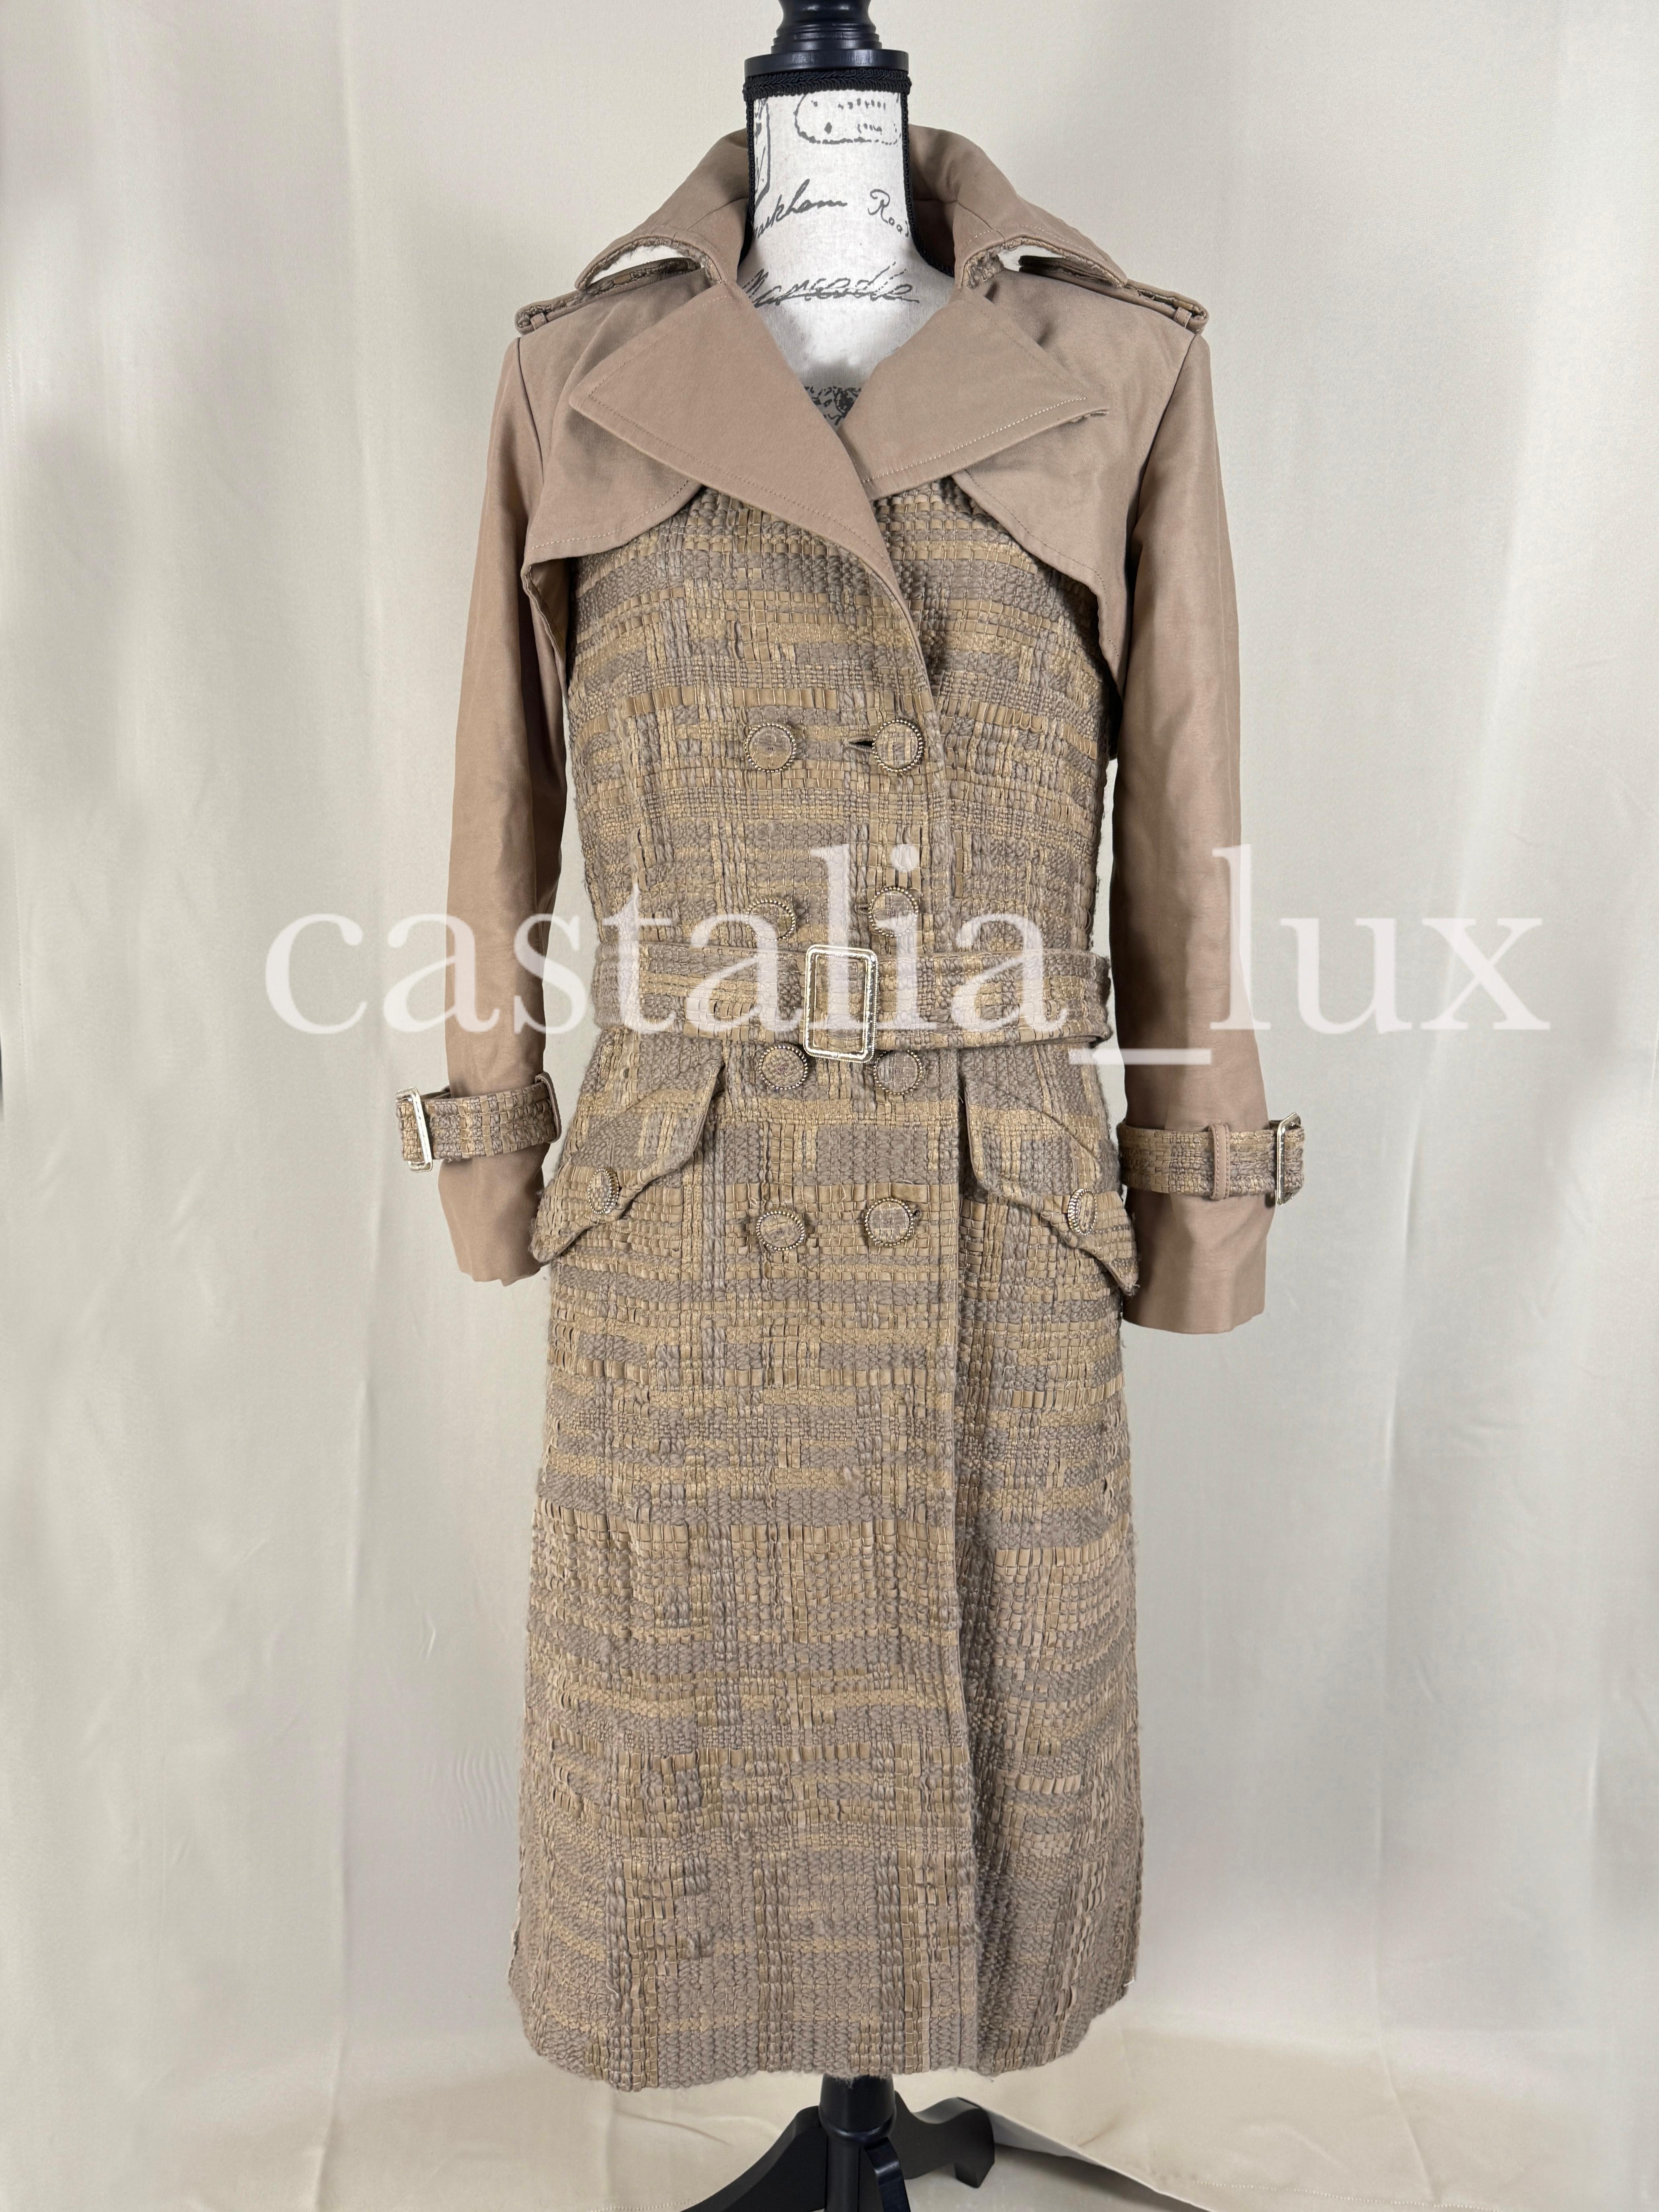 Chanel Iconic Billboards Ribbon Tweed Trench Coat For Sale 3